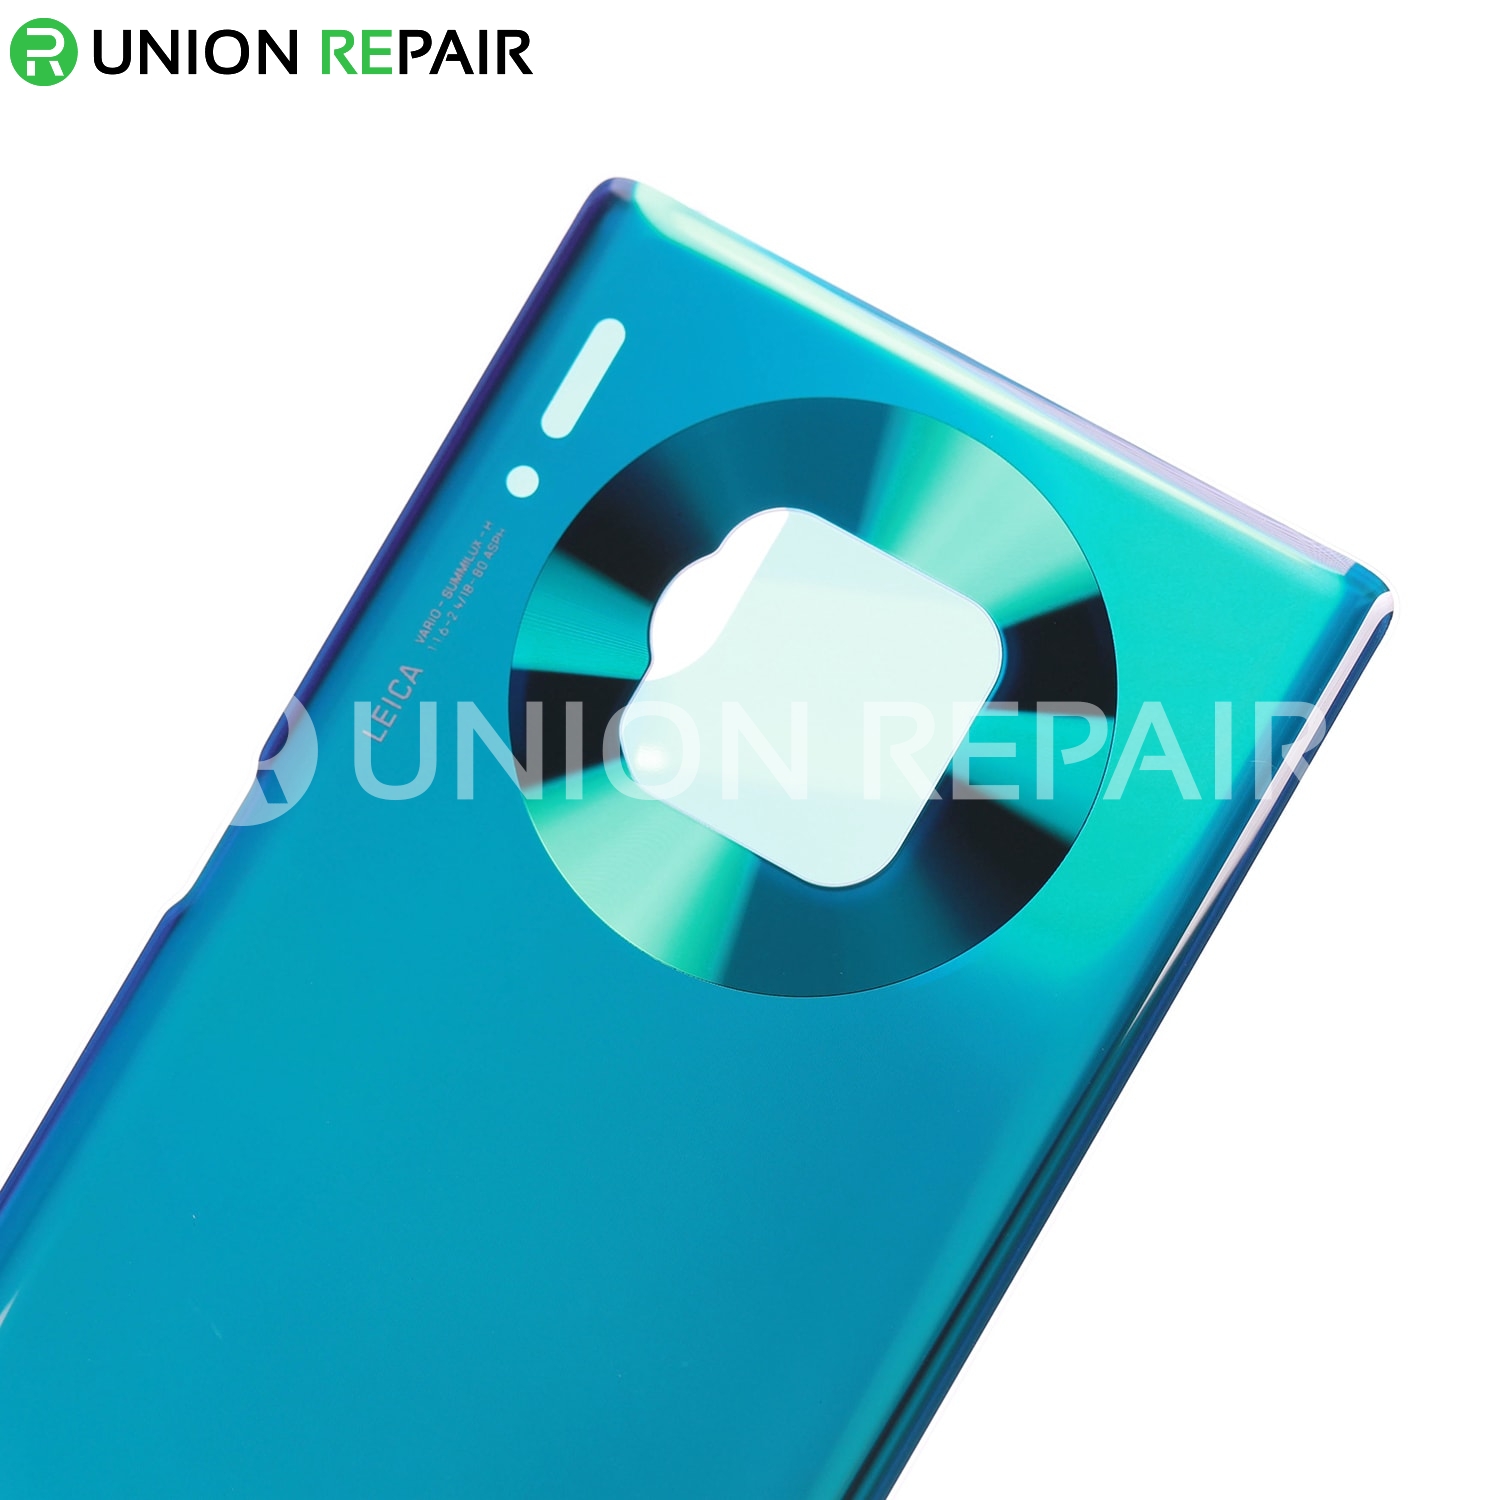 Replacement for Huawei Mate 30 Pro Battery Door - Emerald Green